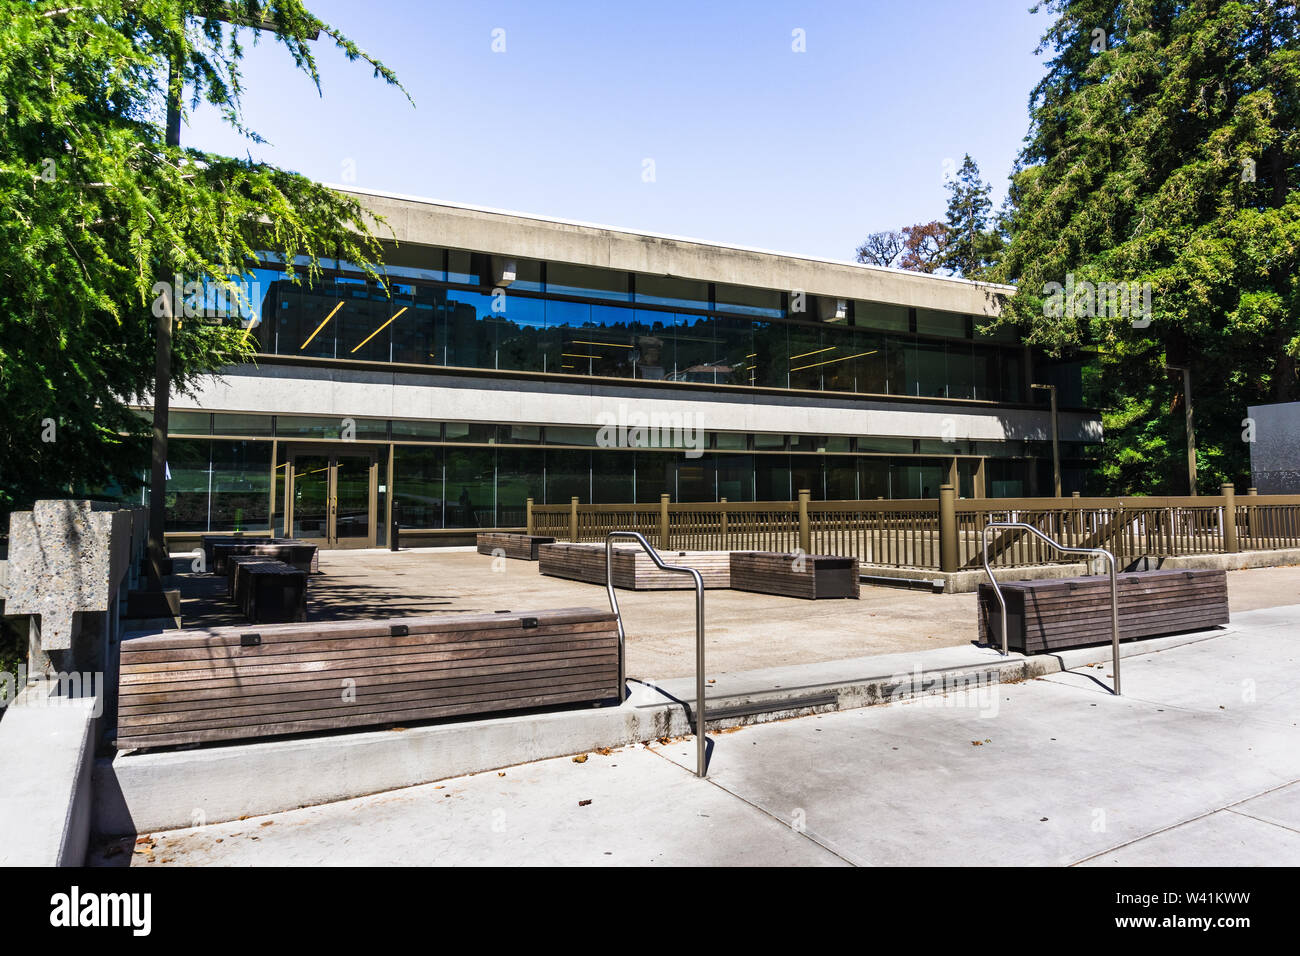 July 13, 2019 Berkeley / CA / USA - Moffitt Library in the UC Berkeley campus is one of the busiest libraries, serving students of all majors with lon Stock Photo